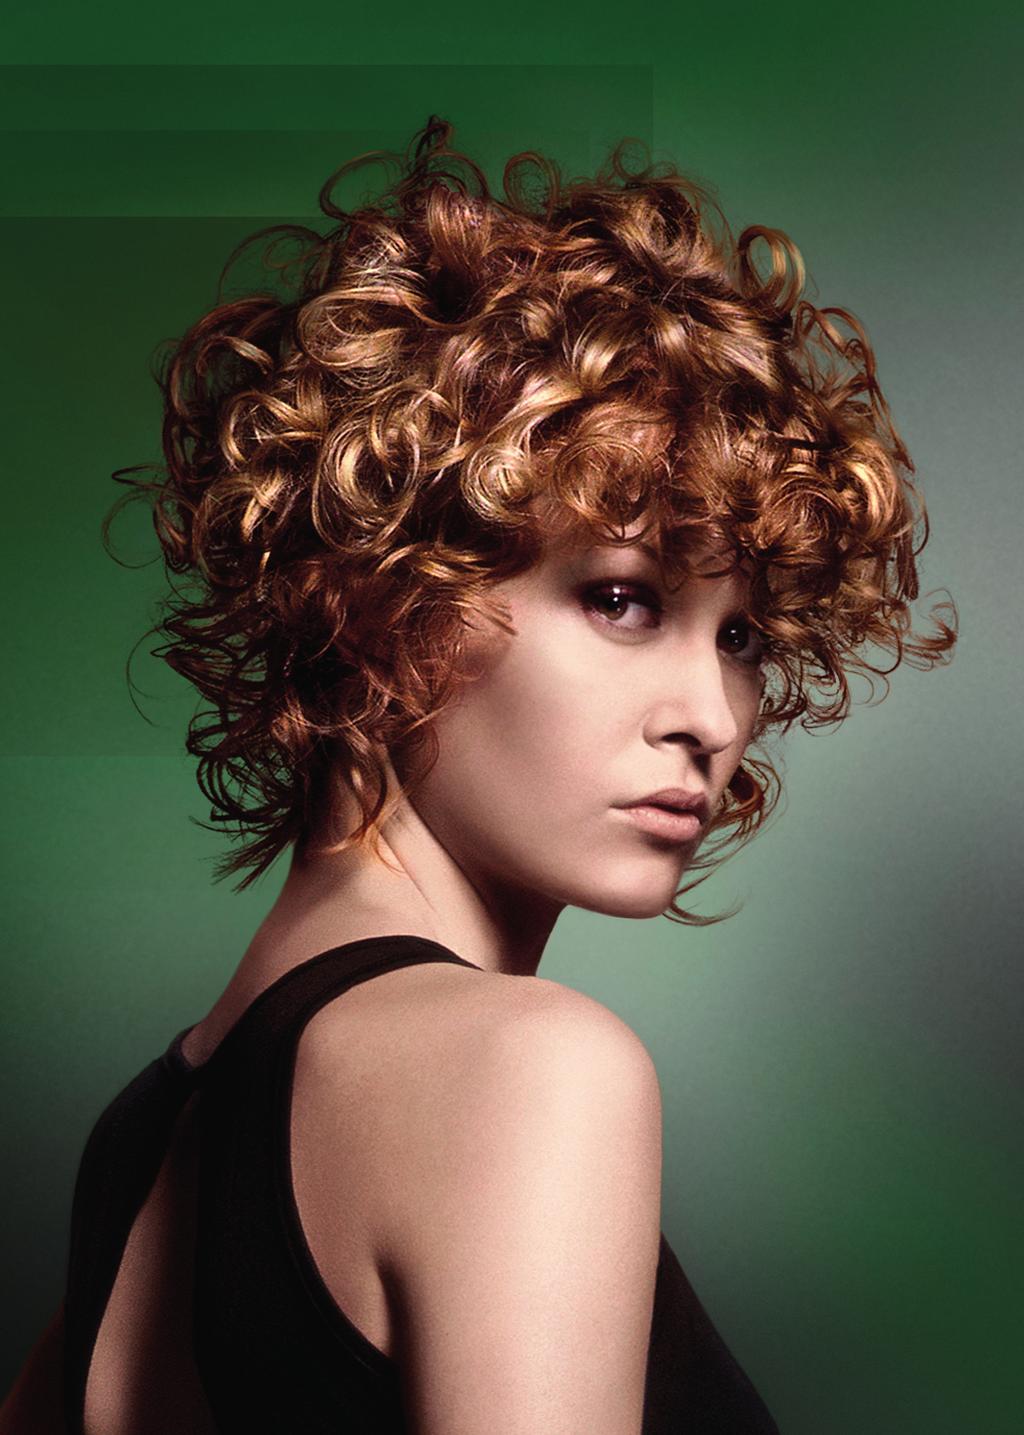 Image courtesy of Goldwell Hairdressing L3 VRQ_Unit 308_Proof 5.